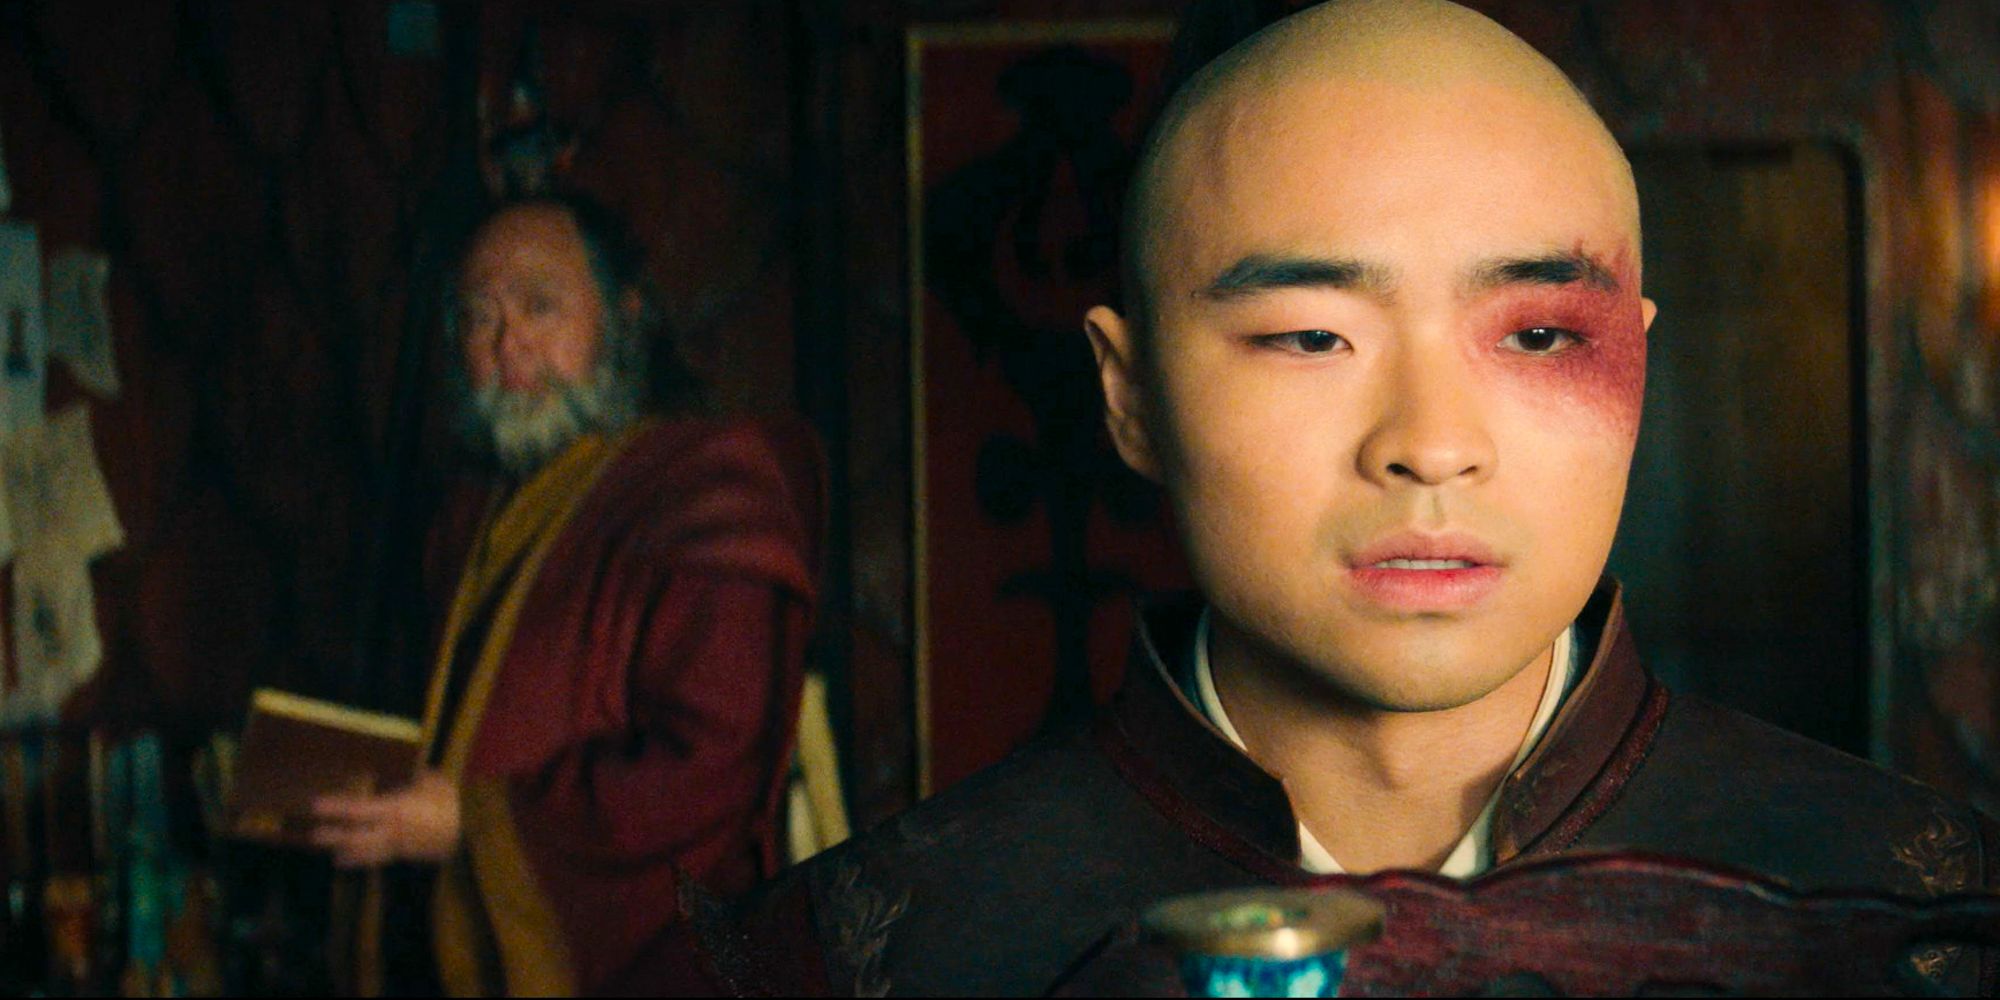 Zuko close up and uncle Iroh in the back from Avatar the last airbender looking gloomy  Dallas James Liu as Zuko Paul Sun-Hyung Lee as Uncle Iroh